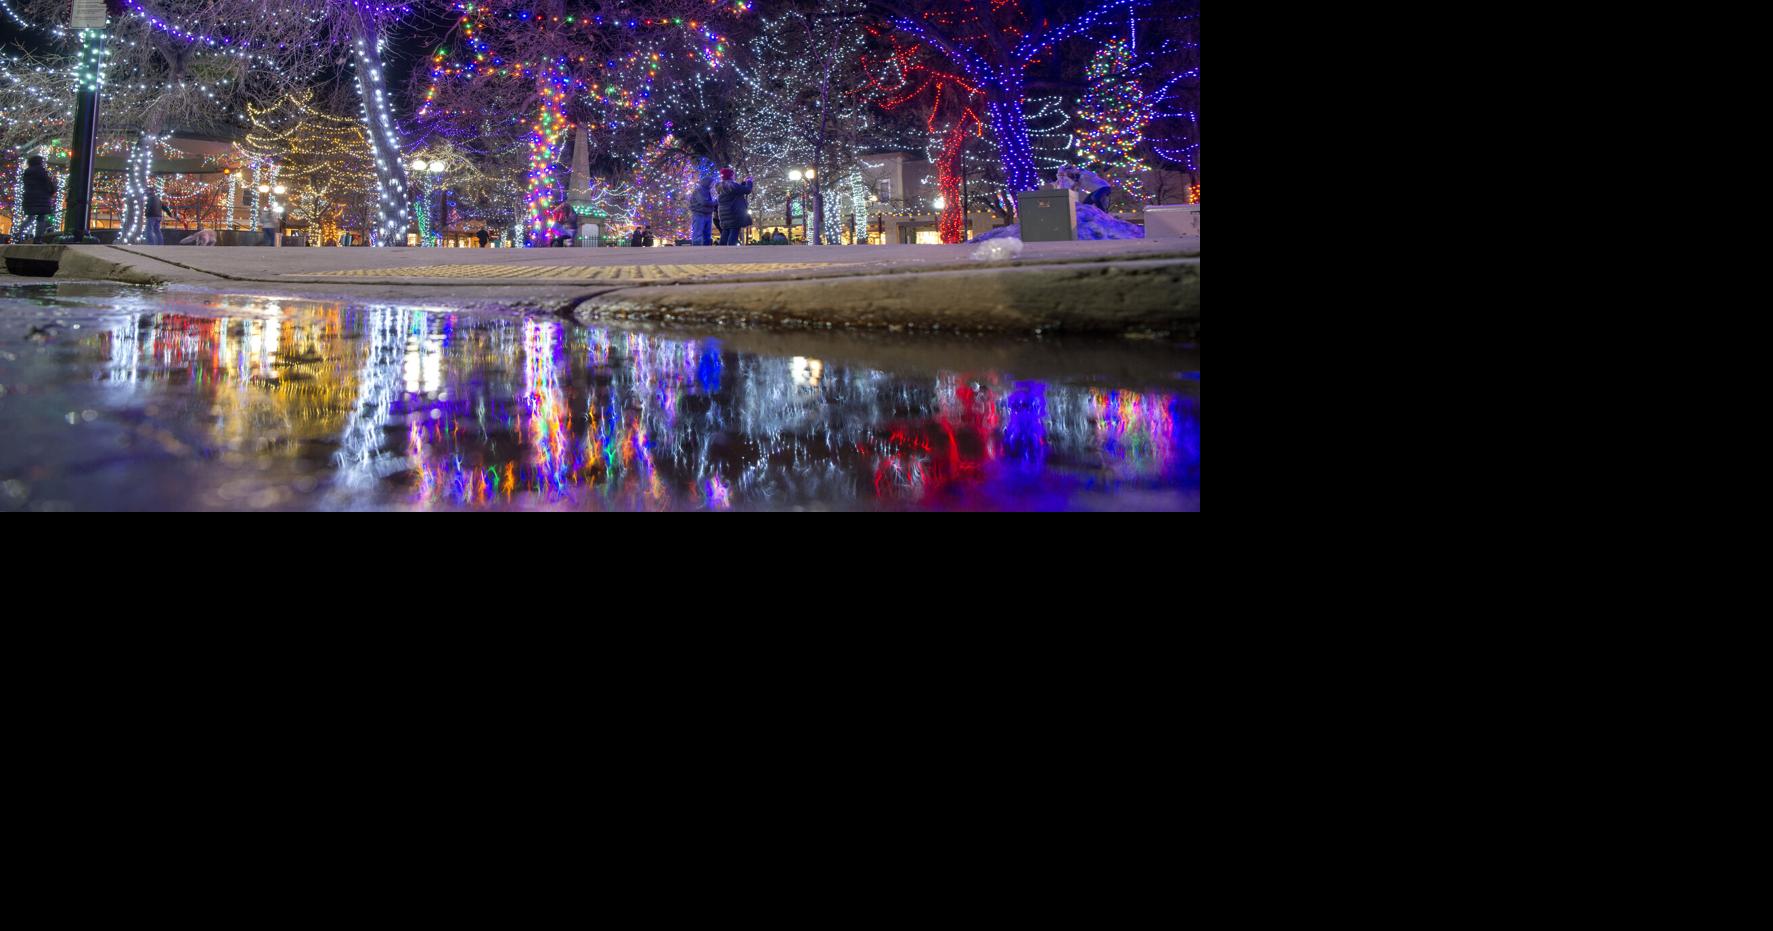 10 of the best neighborhoods to see Albuquerque Christmas lights ...